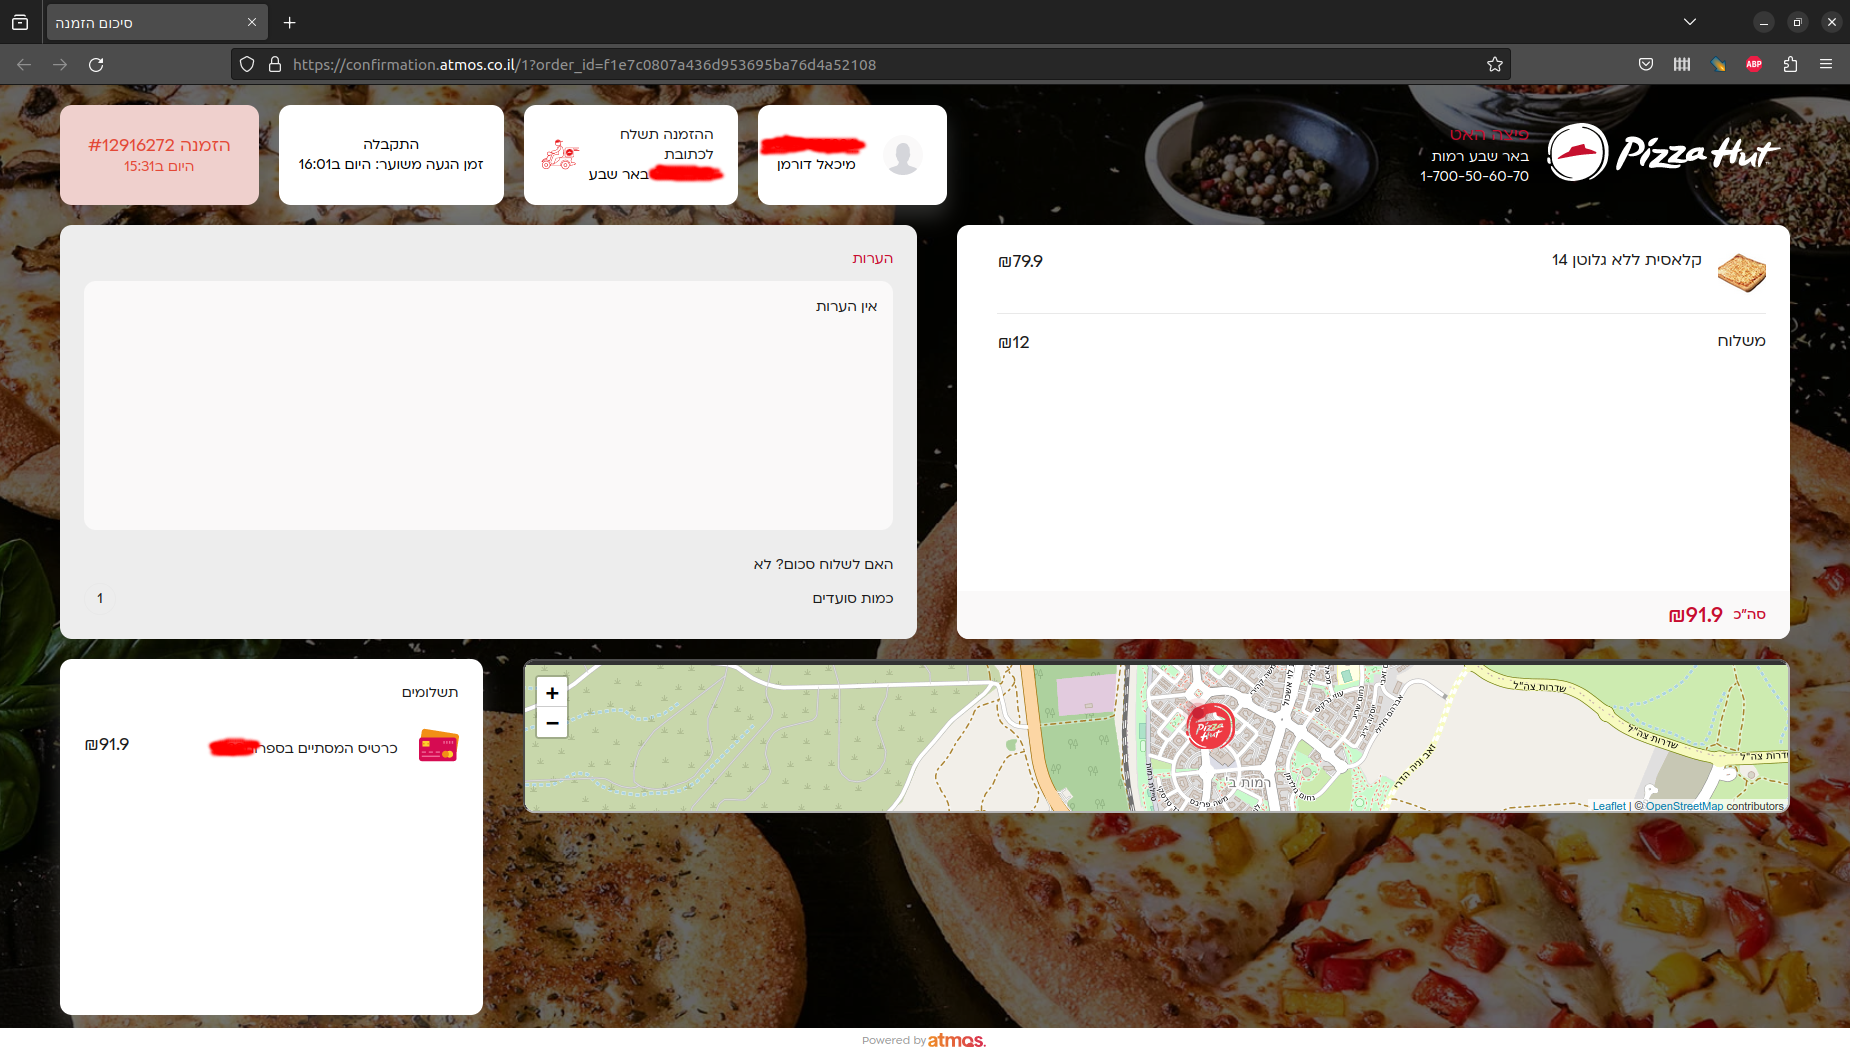 Leaflet web-map in the web interface of Pizza Hut